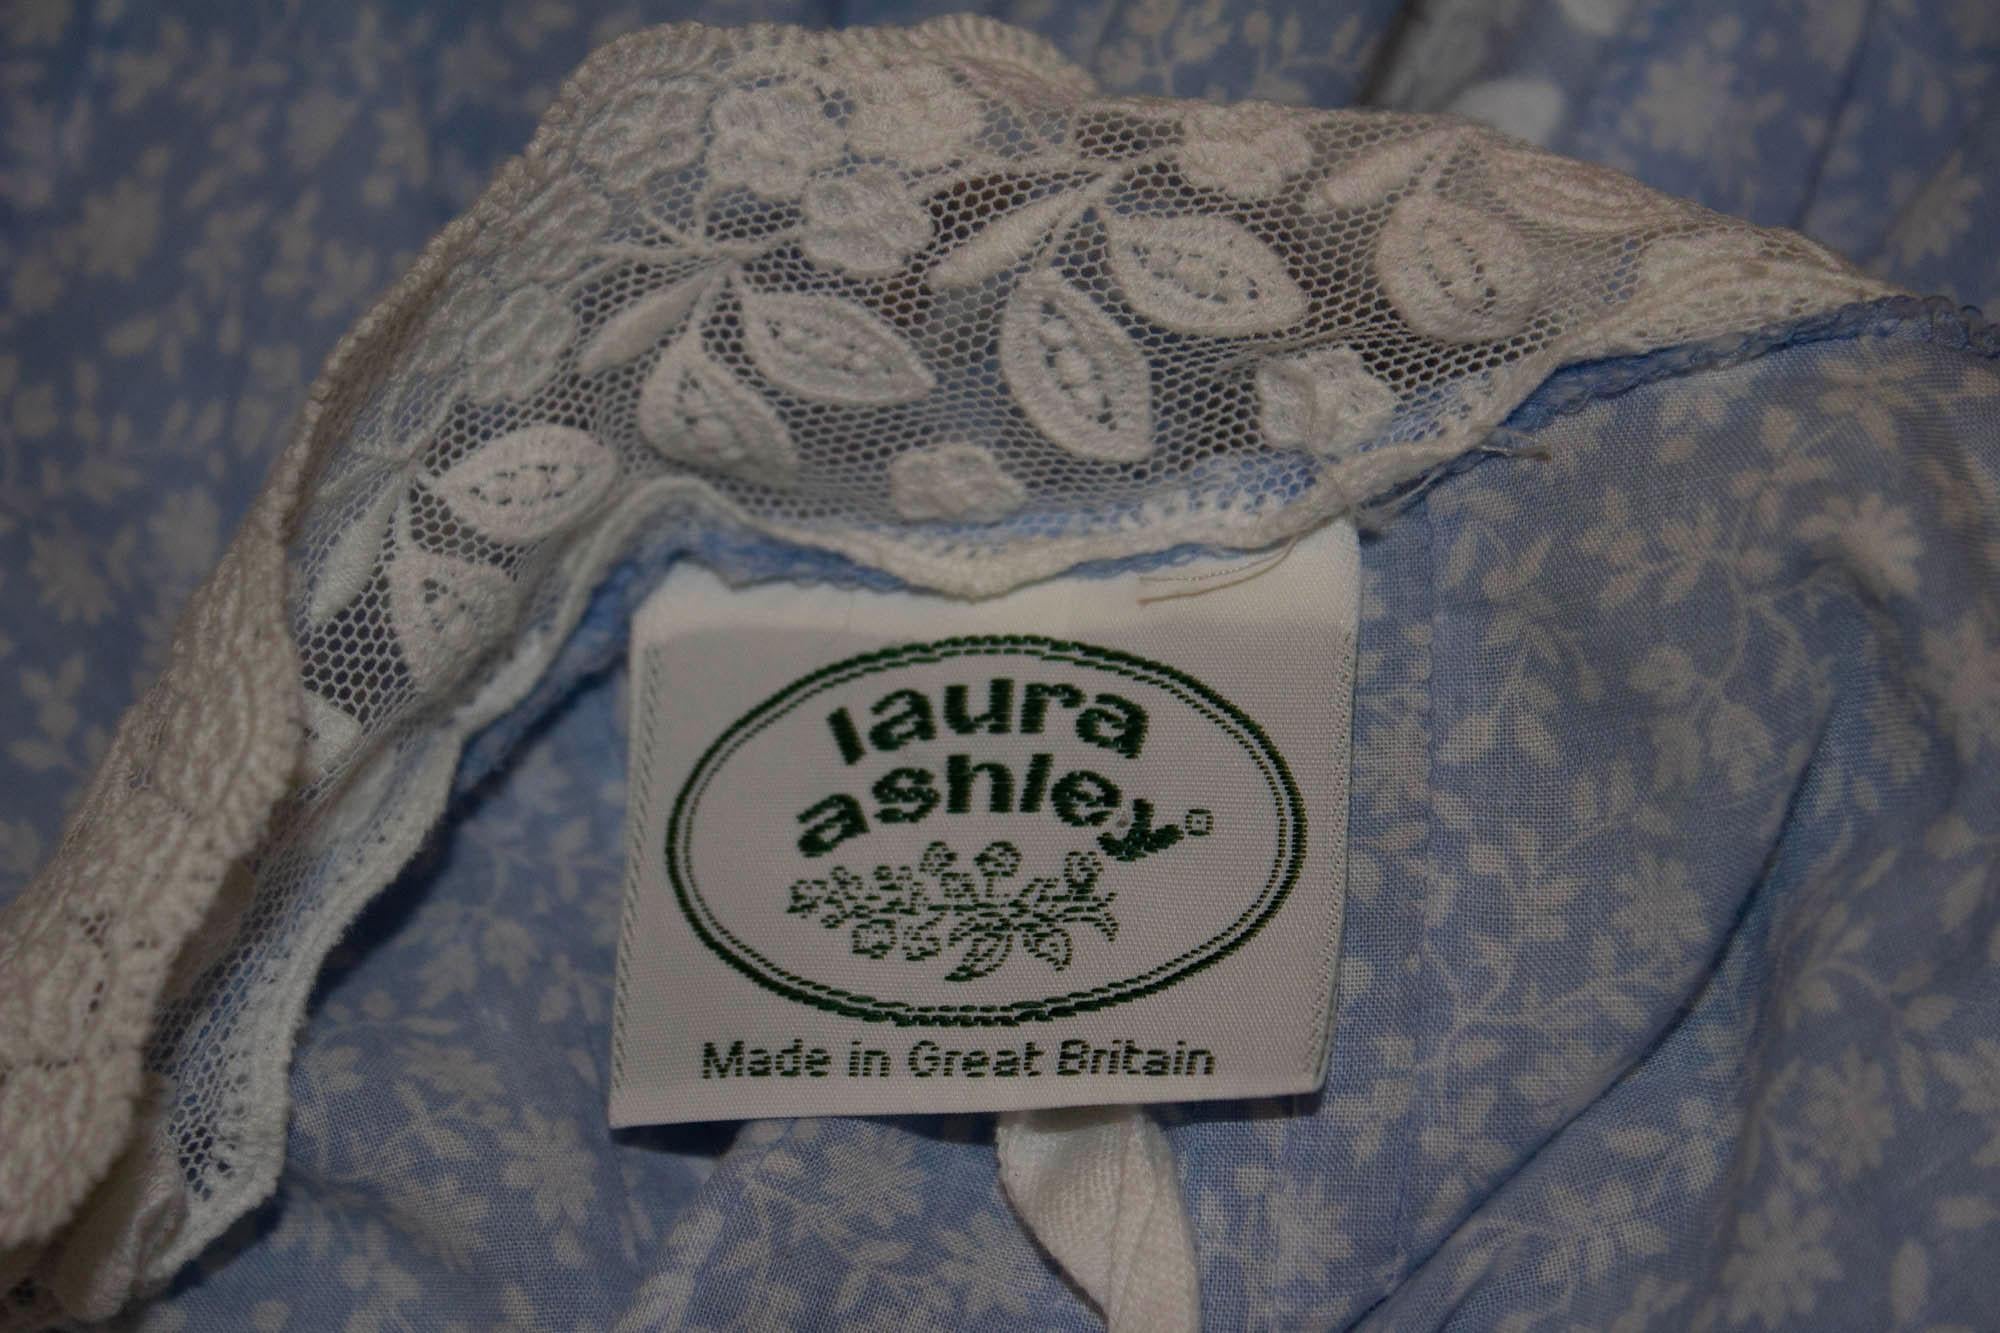 A pretty vintage Laura Ashley dress and bolero. They are both in a blue and white print. The dres s has a central back zip, folds on the front and thin straps. The bolero jacket has stitch detail on the front and sleaves with a lace trim on the cuff